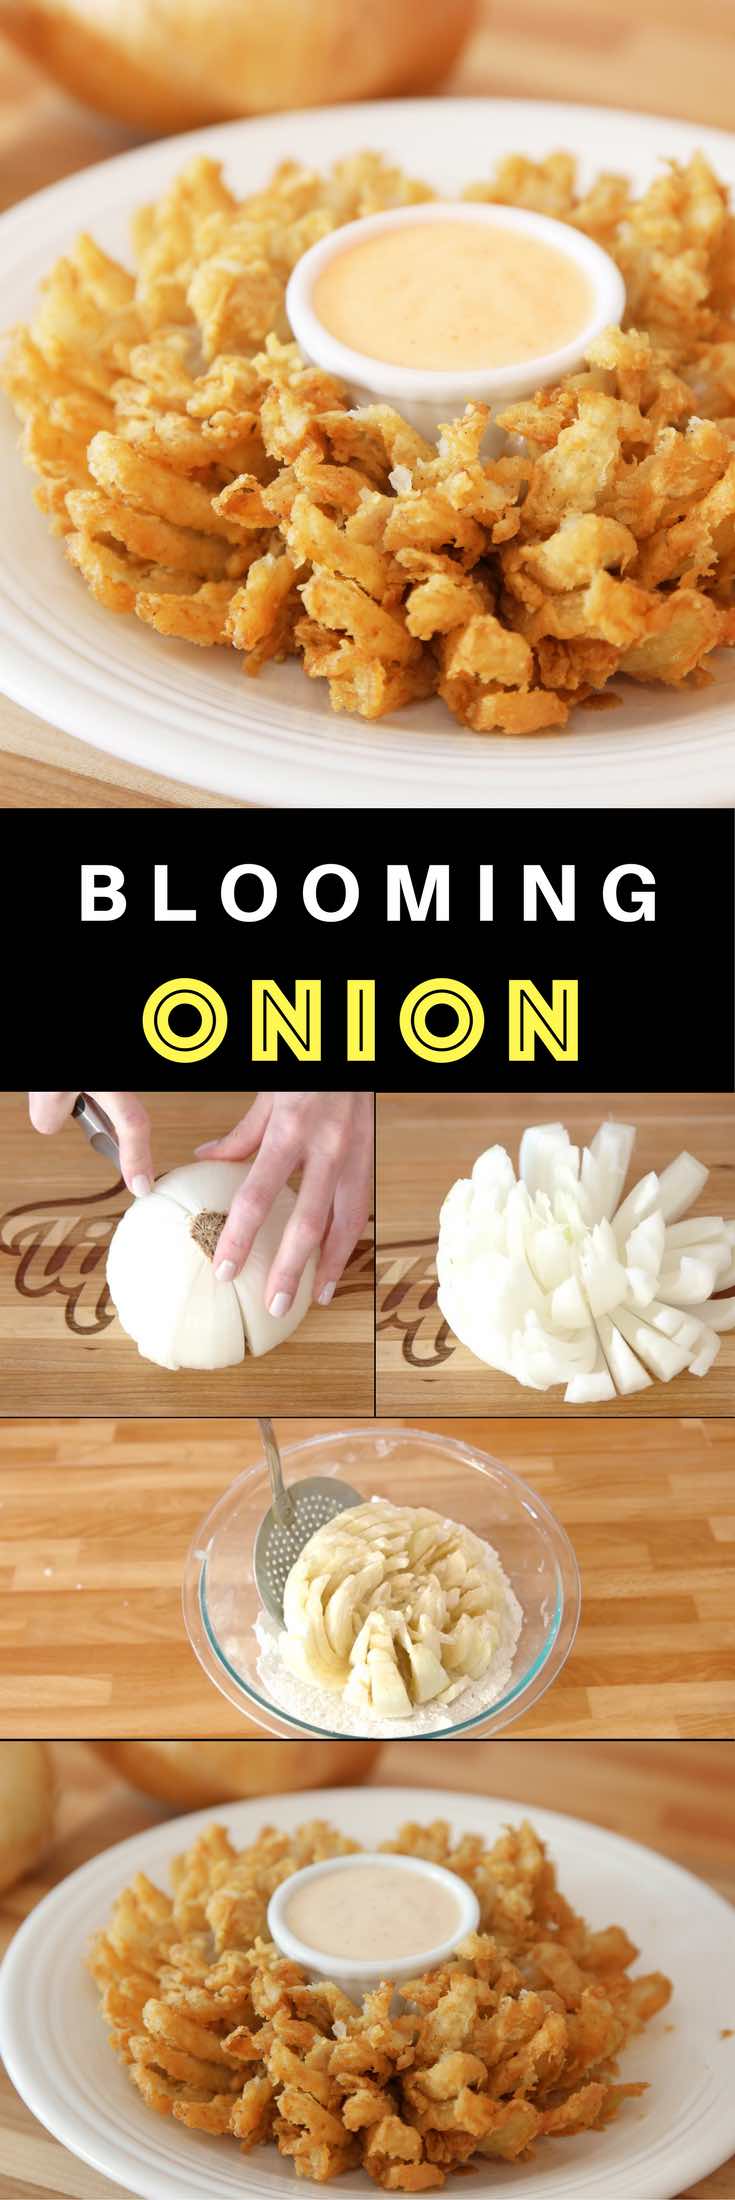 Blooming Onion – Crispy, batter-fried onions that resemble flower pedals at Outback Steakhouse! This is an easy and impressive looking appetizer that’s great to share. All you need is a few simple ingredients. Follow this video recipe on how to slice and fry a blooming onion. | Quick and easy recipe, vegetarian. Party appetizer. Video recipe | Tipbuzz.com 